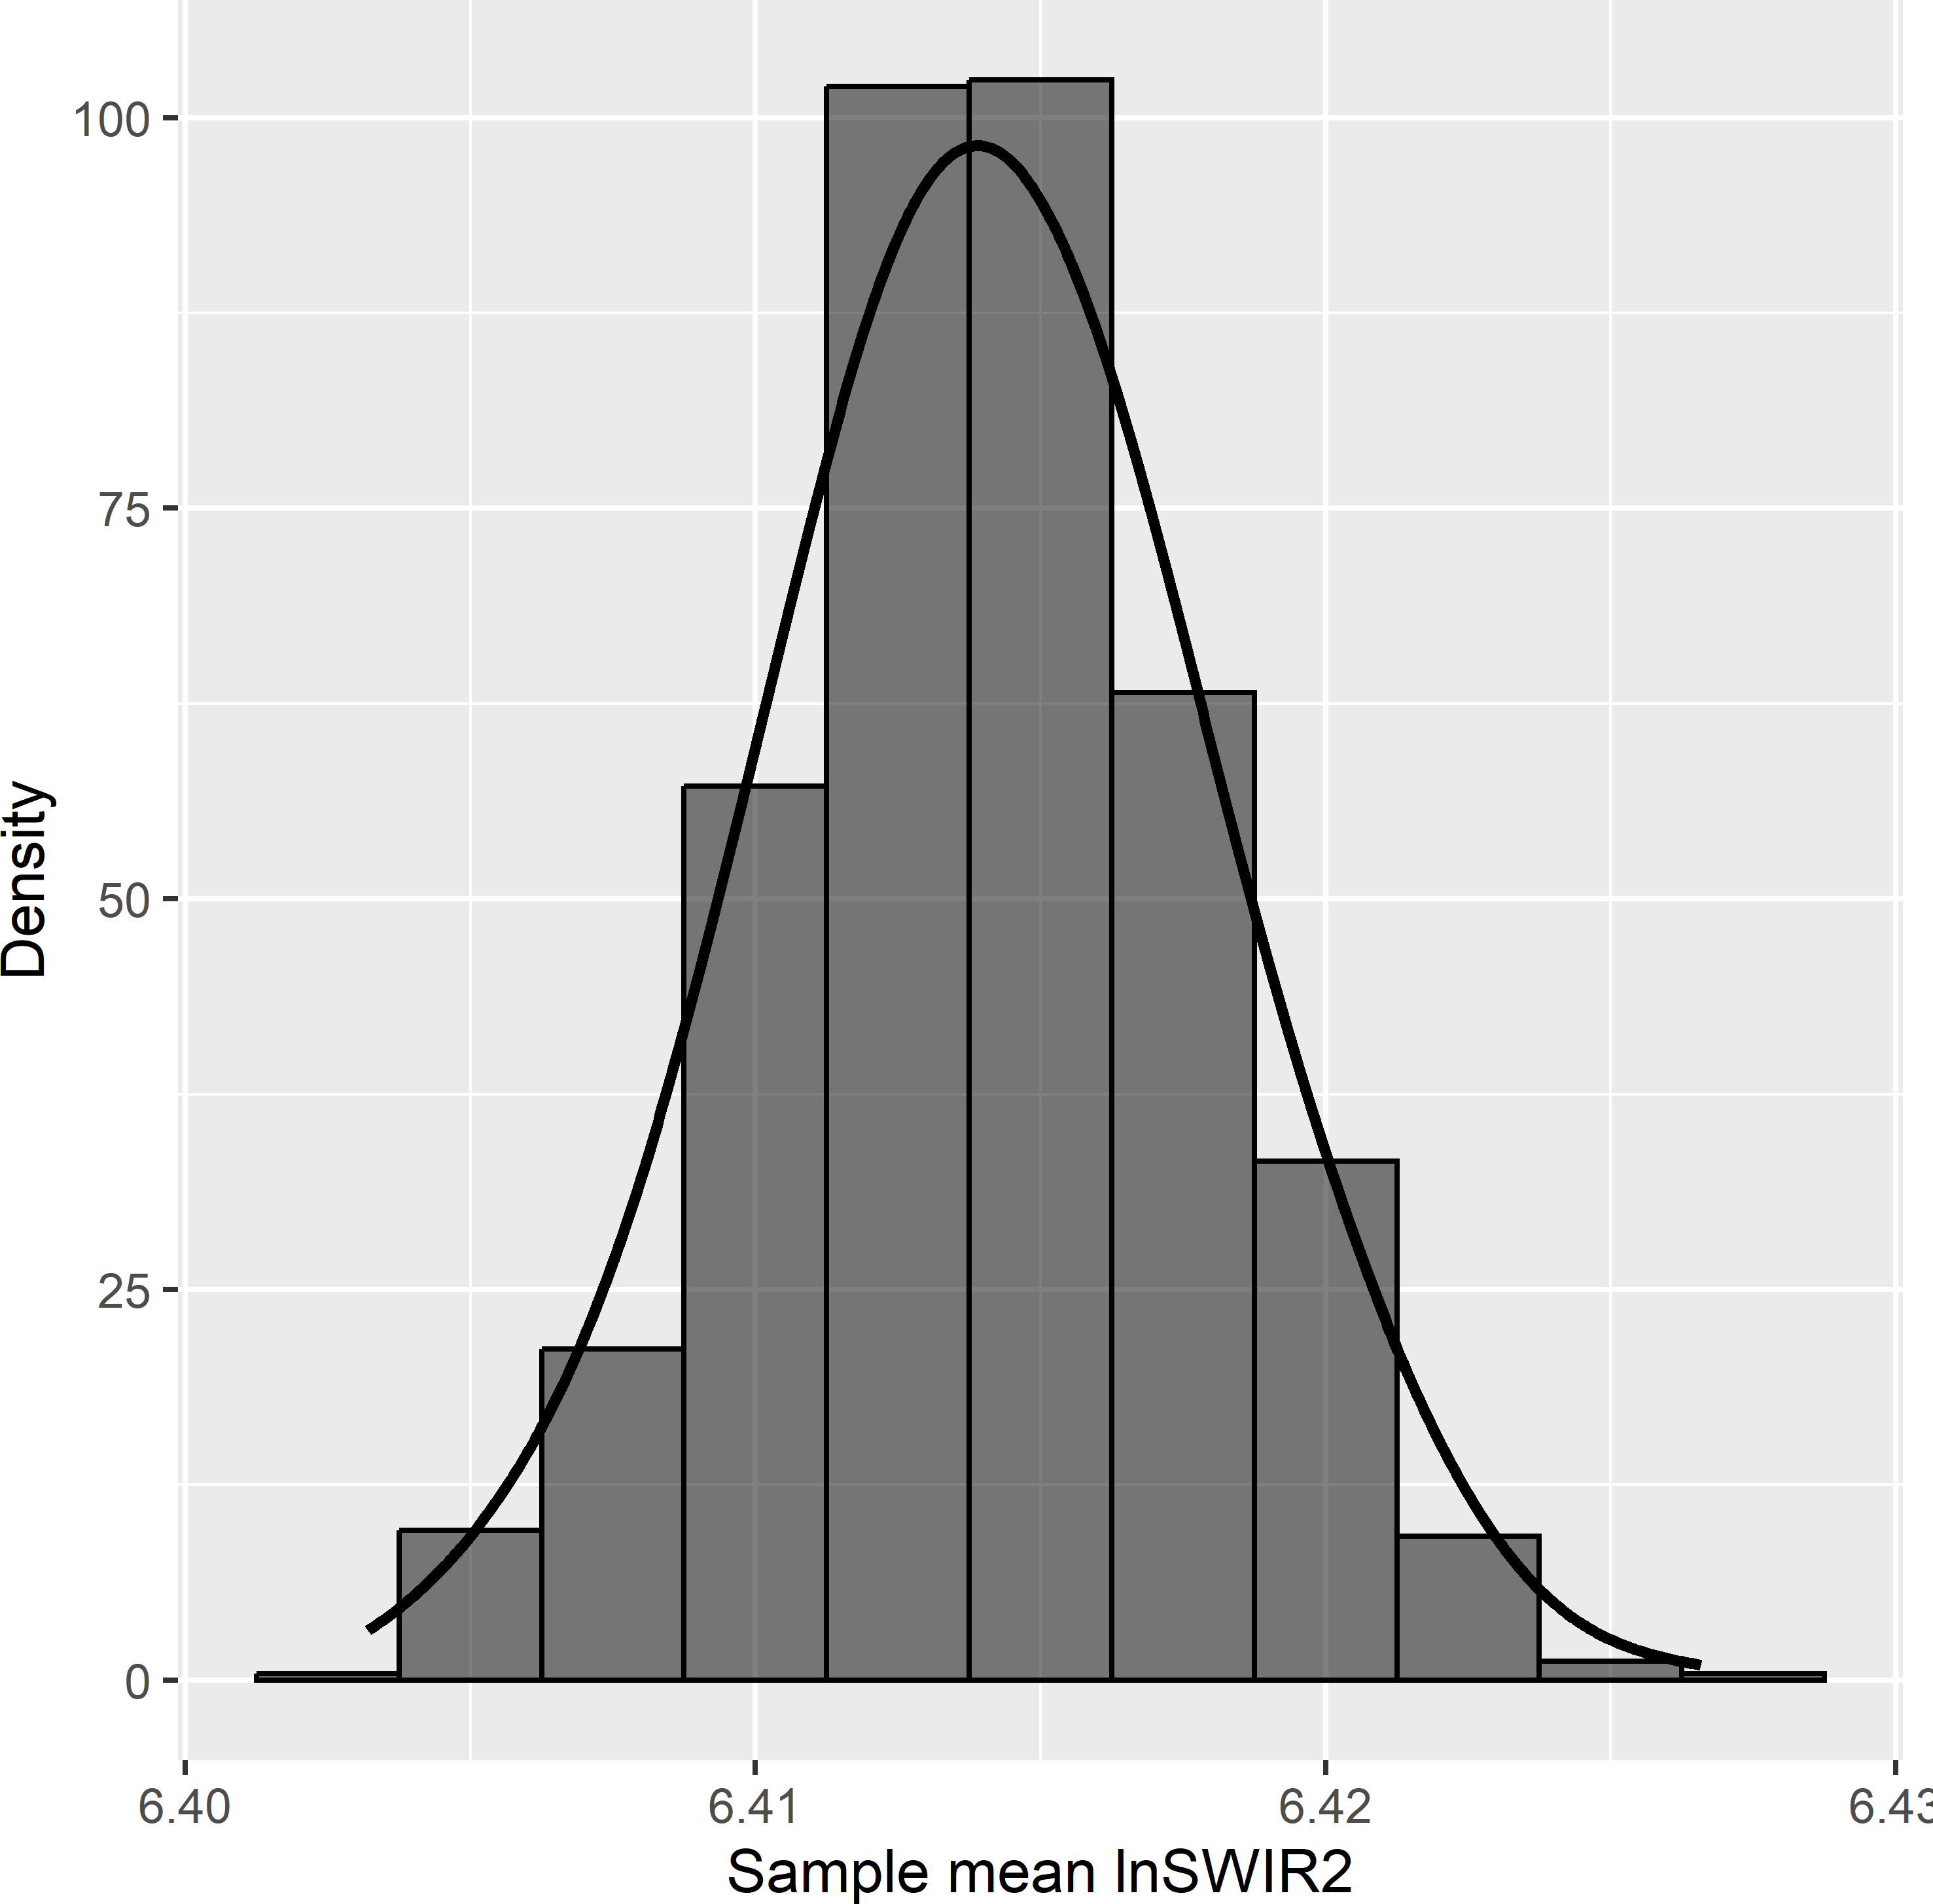 Approximated sampling distribution of the sample mean of balancing variable lnSWIR2 in Eastern Amazonia with balanced sampling of size 100 and equal inclusion probabilities.